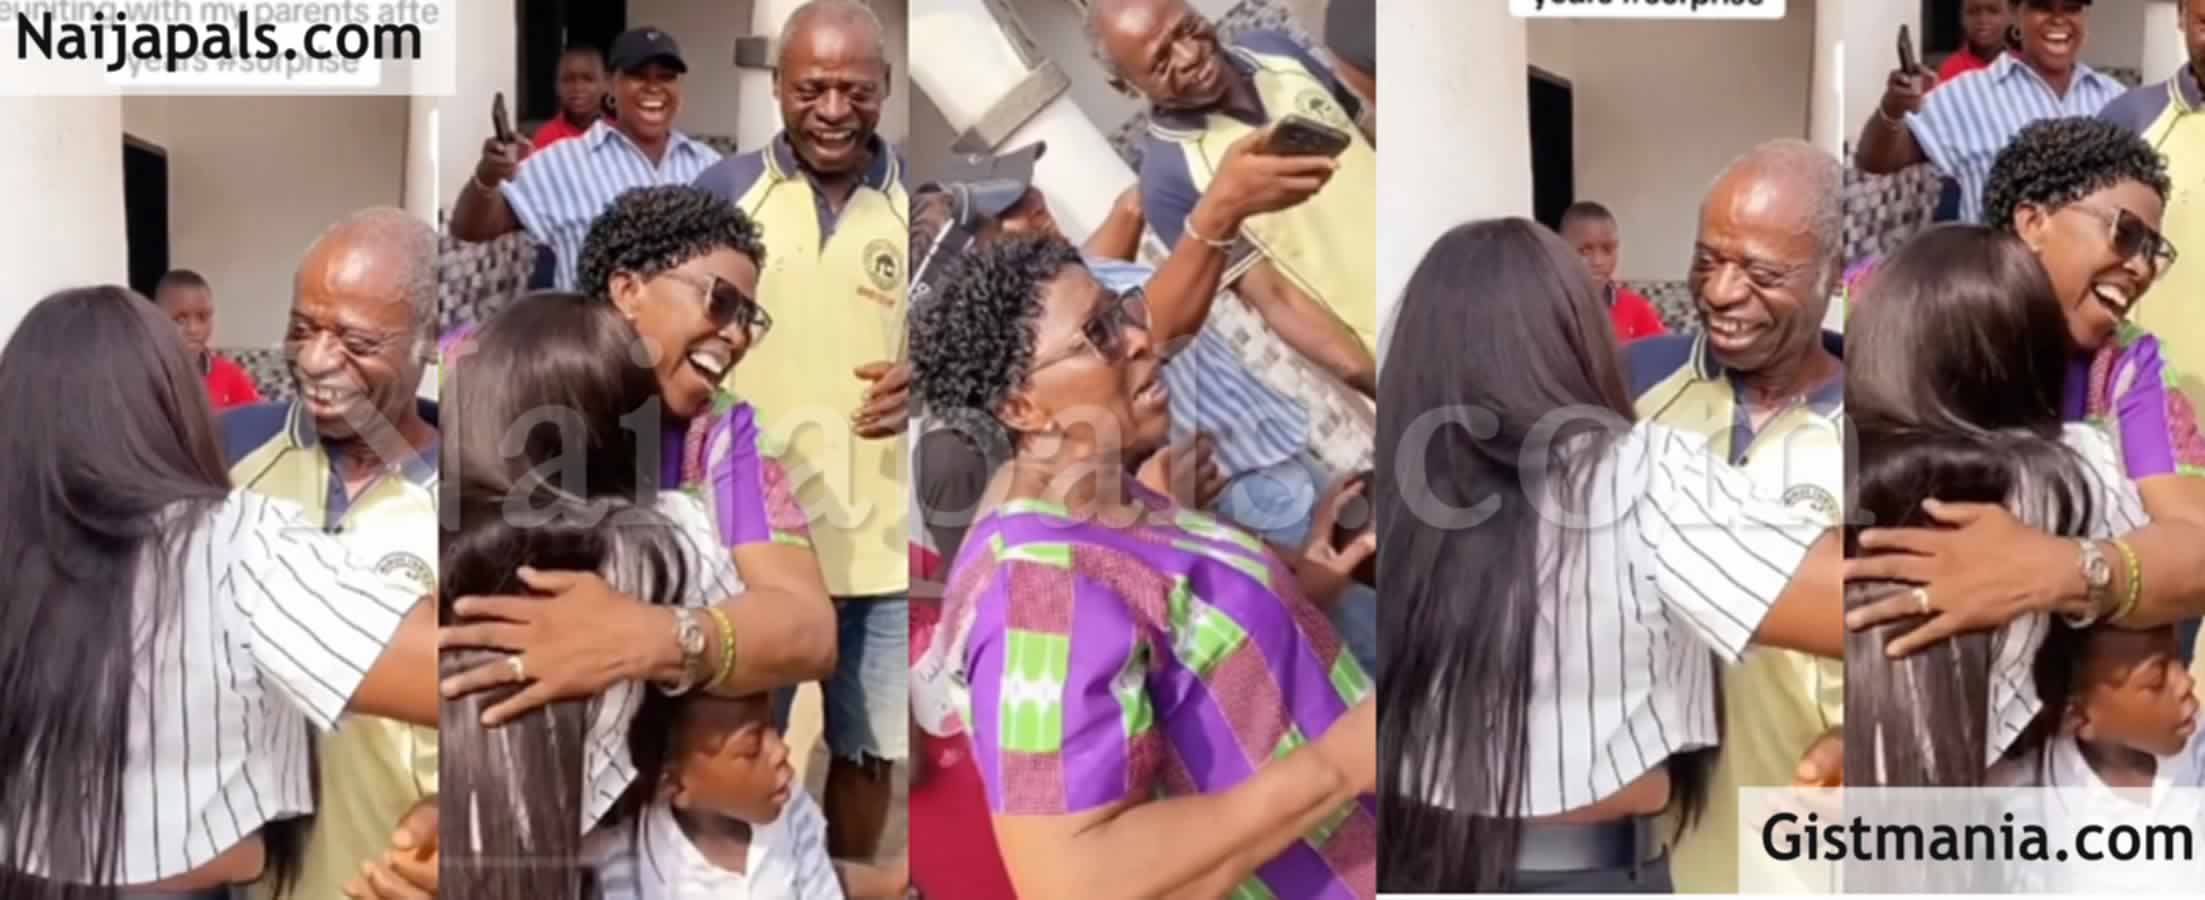 Emotional Moment Nigerian Lady Based in UK Surprising Returned Home After 14yrs (Video)